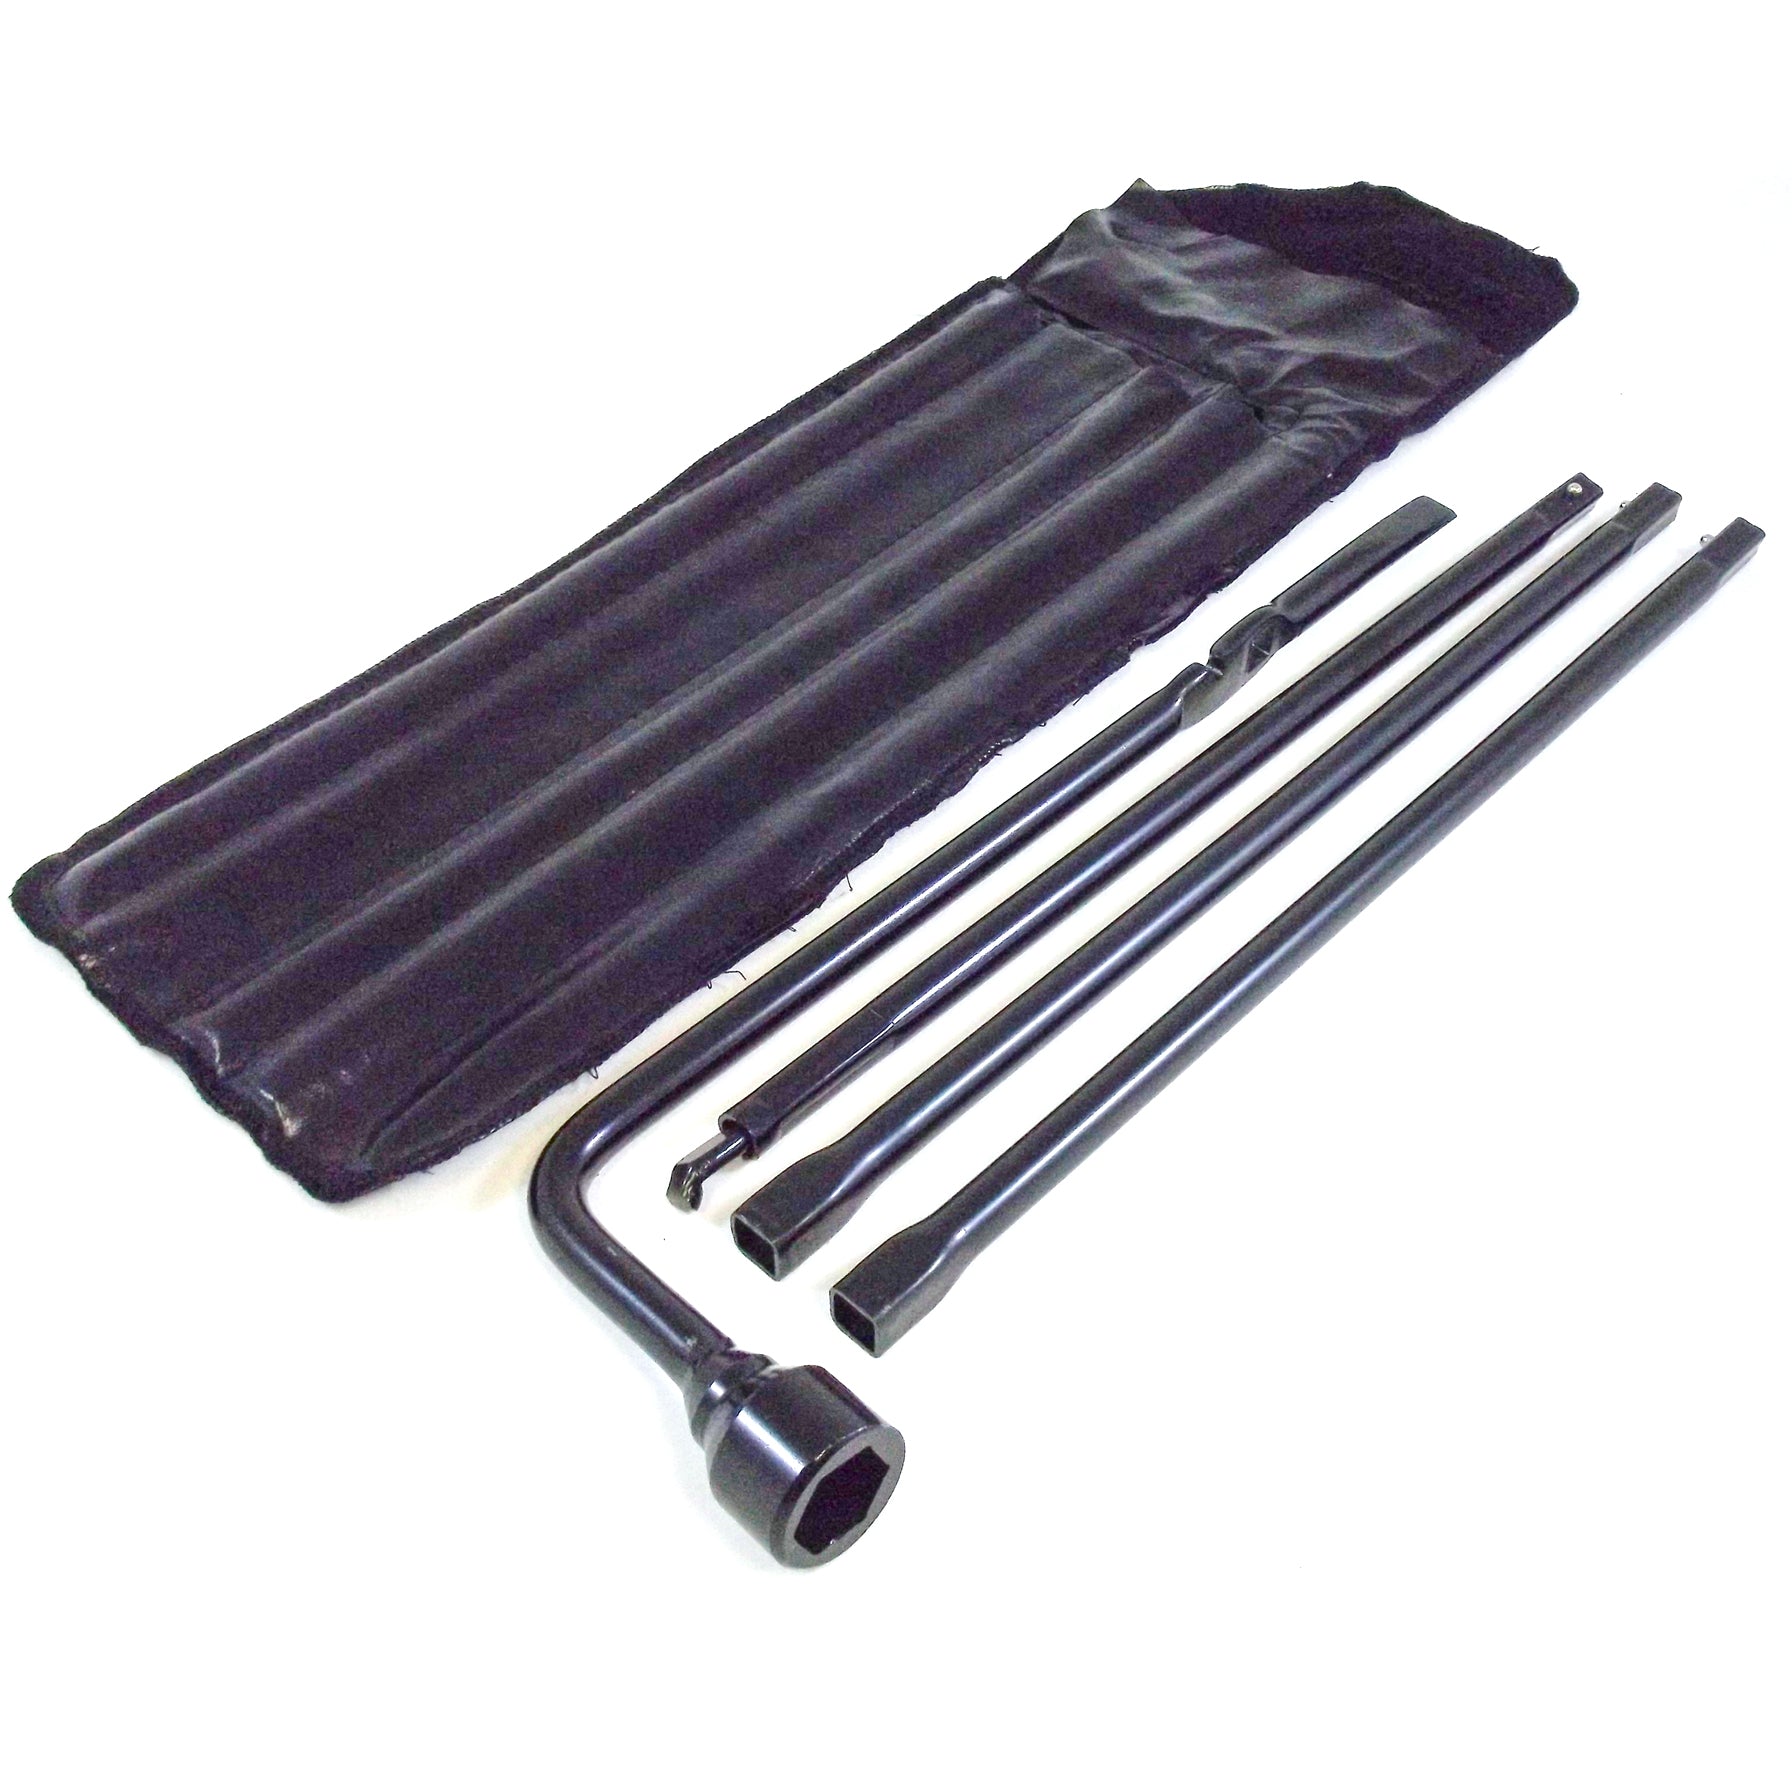 Spare Tire Tool Kit with Case for 1999-2018 Compatible with Chevy Silverado 1500 & GMC Sierra 1500 Tire Iron Lug Wrench, 4 piece Tool Kit to Lower Spare Tire (1999-2019 2500 HD and 3500 HD)